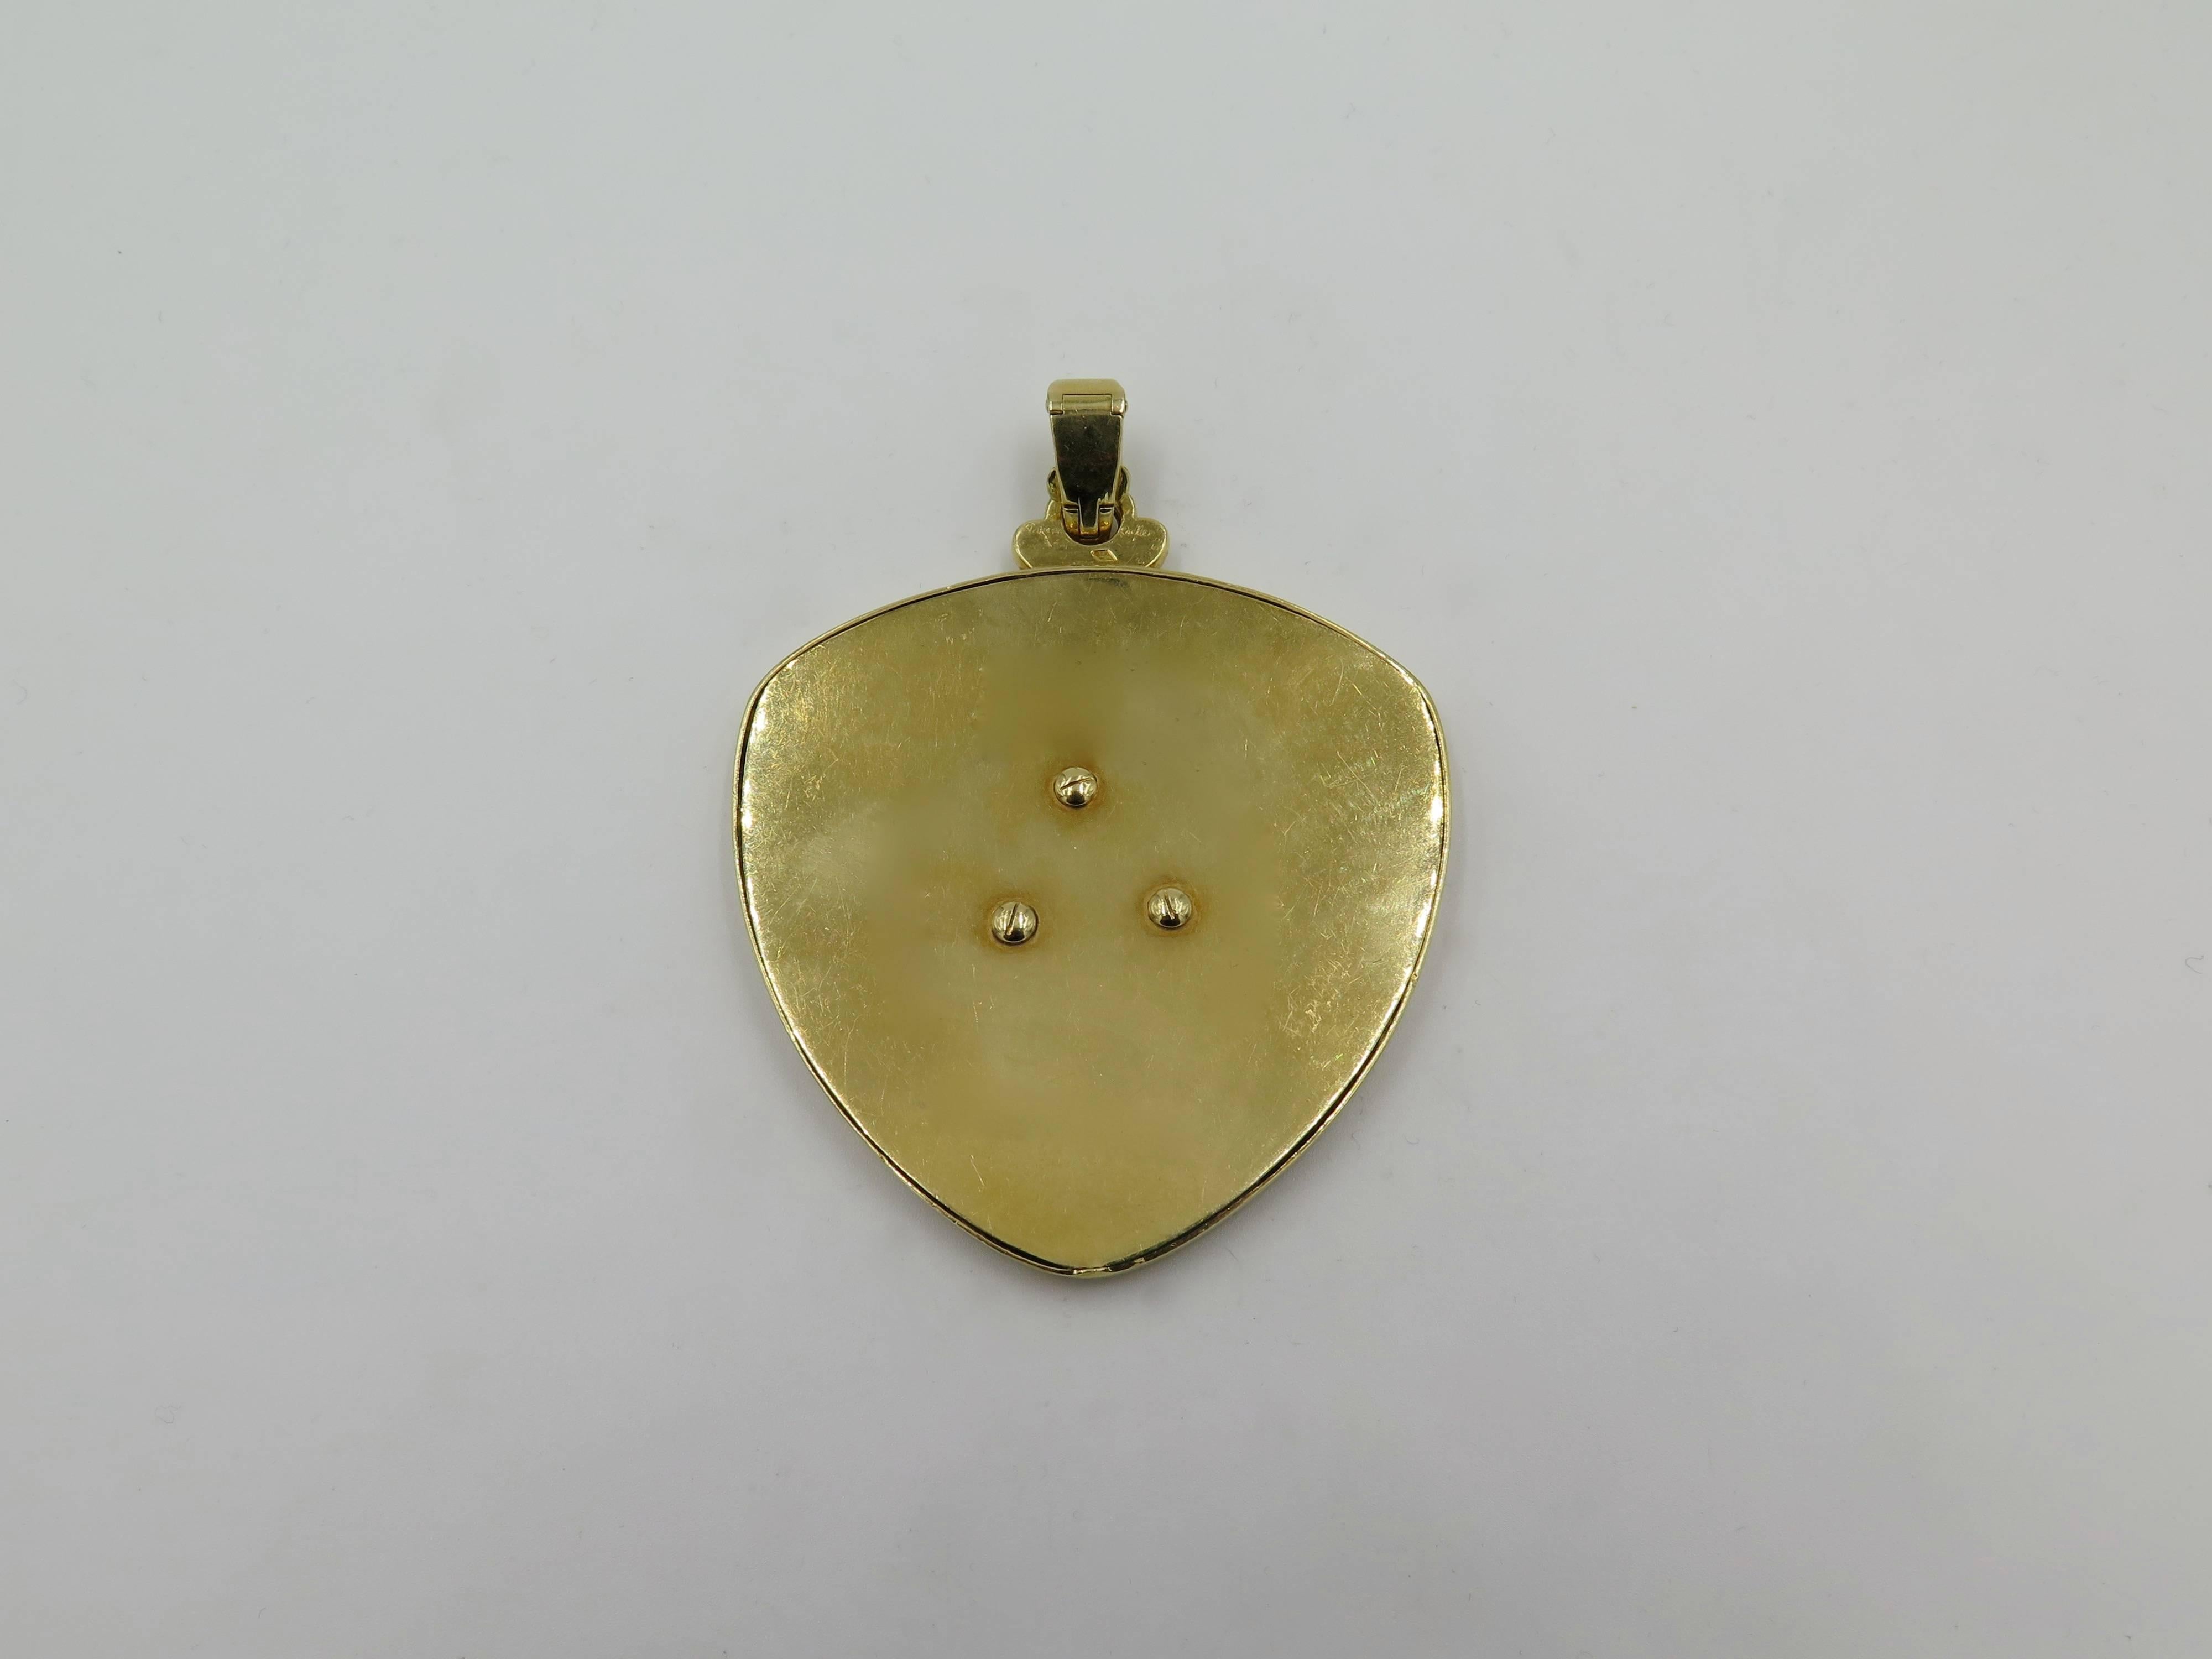 An 18 karat yellow gold, lapis lazuli and mother of pearl pendant.  Cartier Paris. Circa 1970. Of shield shaped outline, set with inlay mother of pearl, enhanced by applies lapis lazuli floral motifs. Length is approximately 3 inches (including